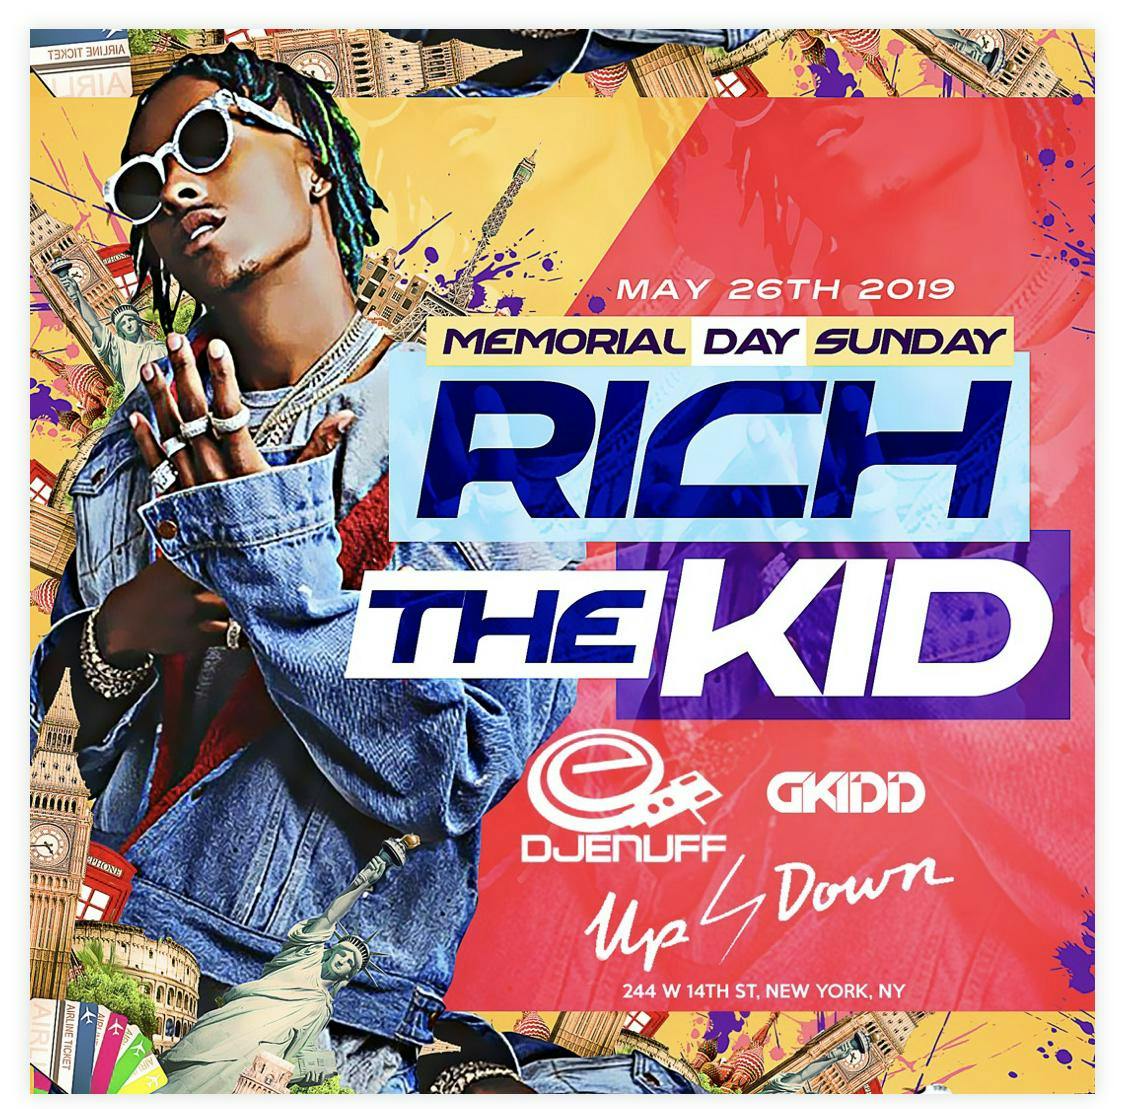 Rich the kid at Up & Down Memorial Day Sunday 